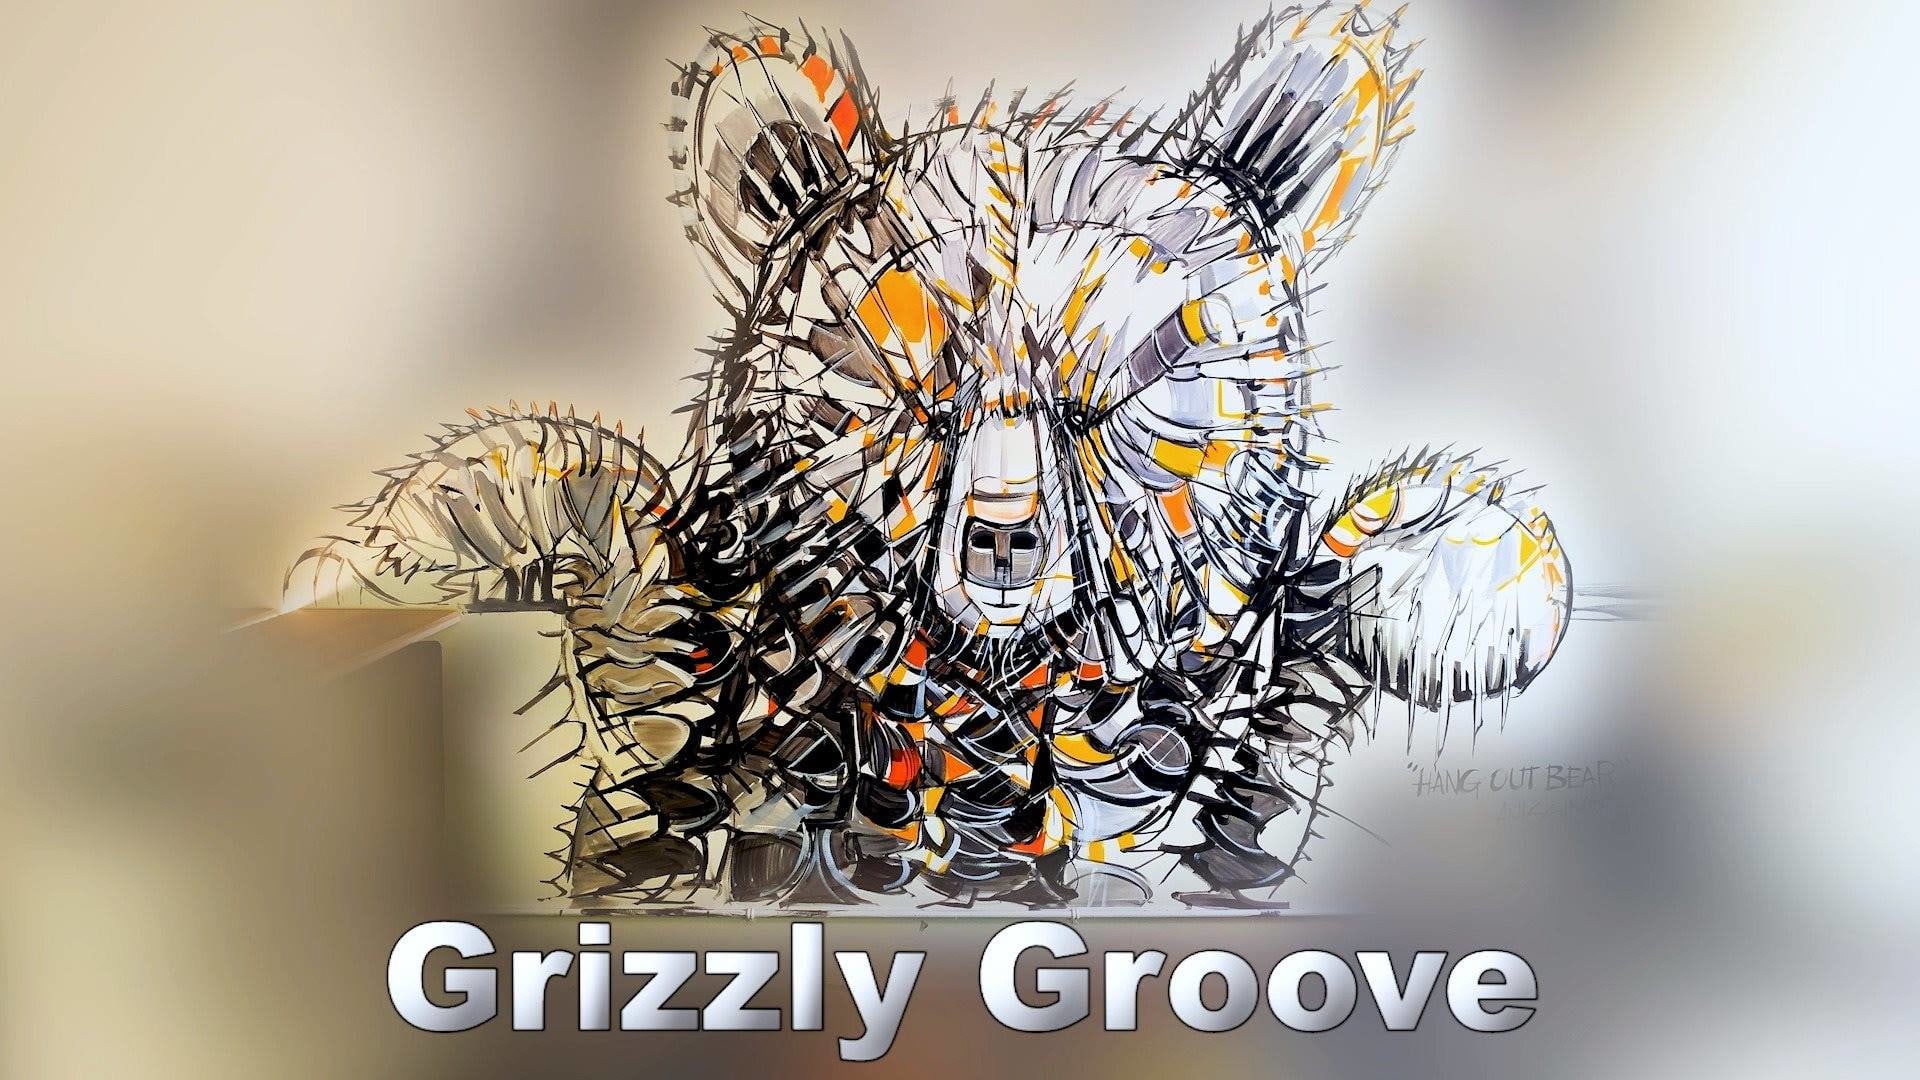 Grizzly Groove